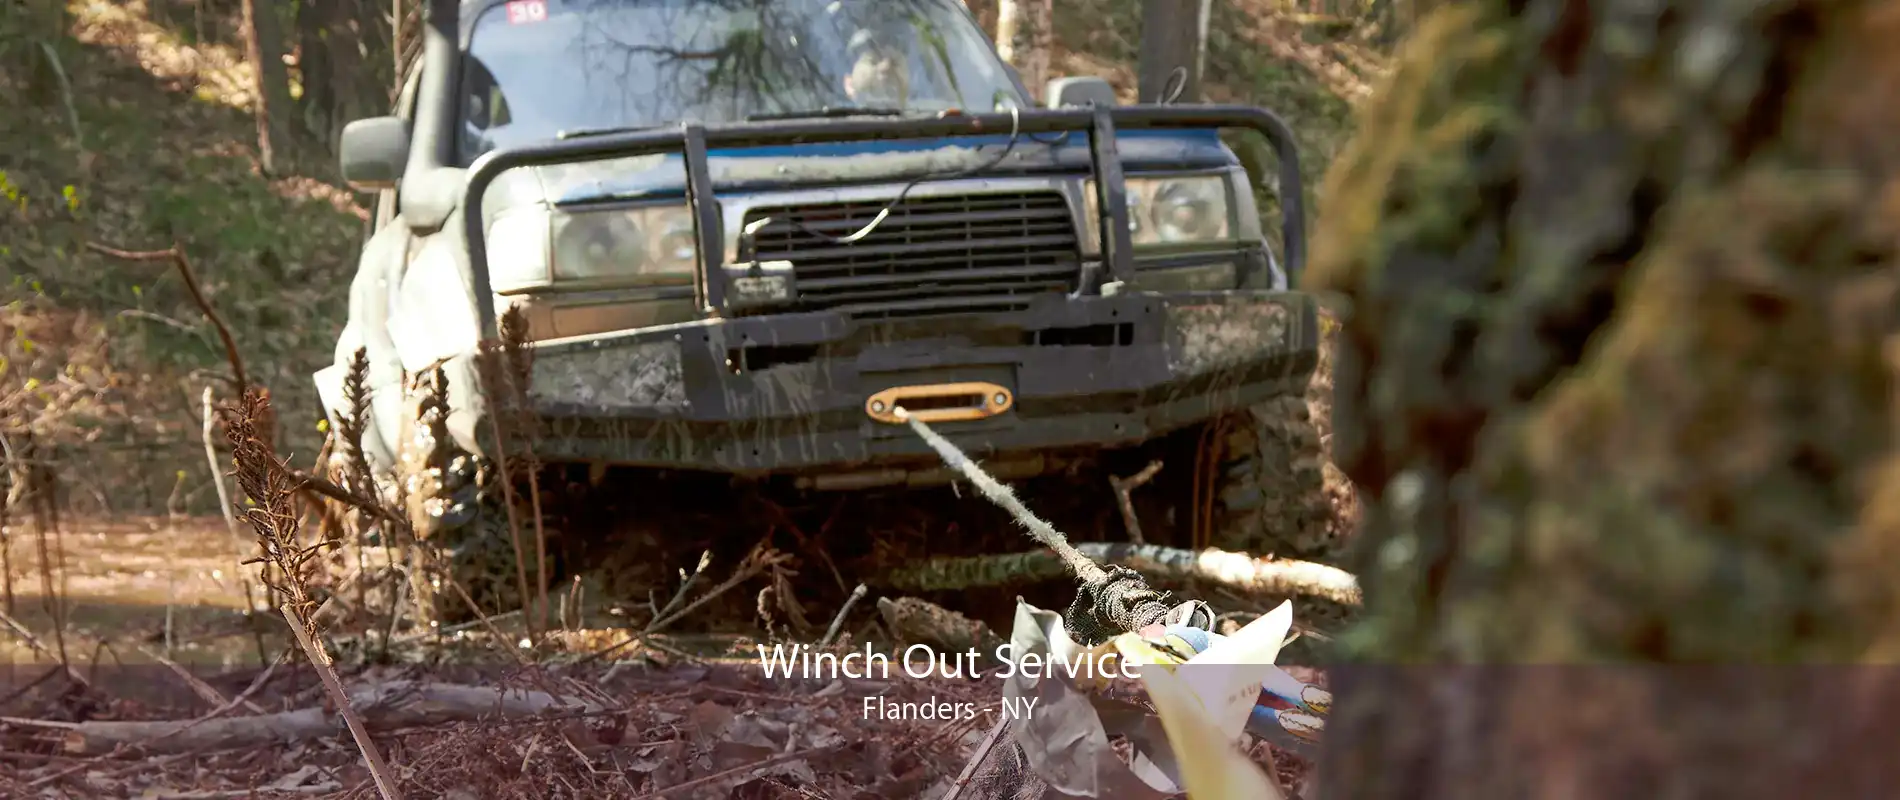 Winch Out Service Flanders - NY